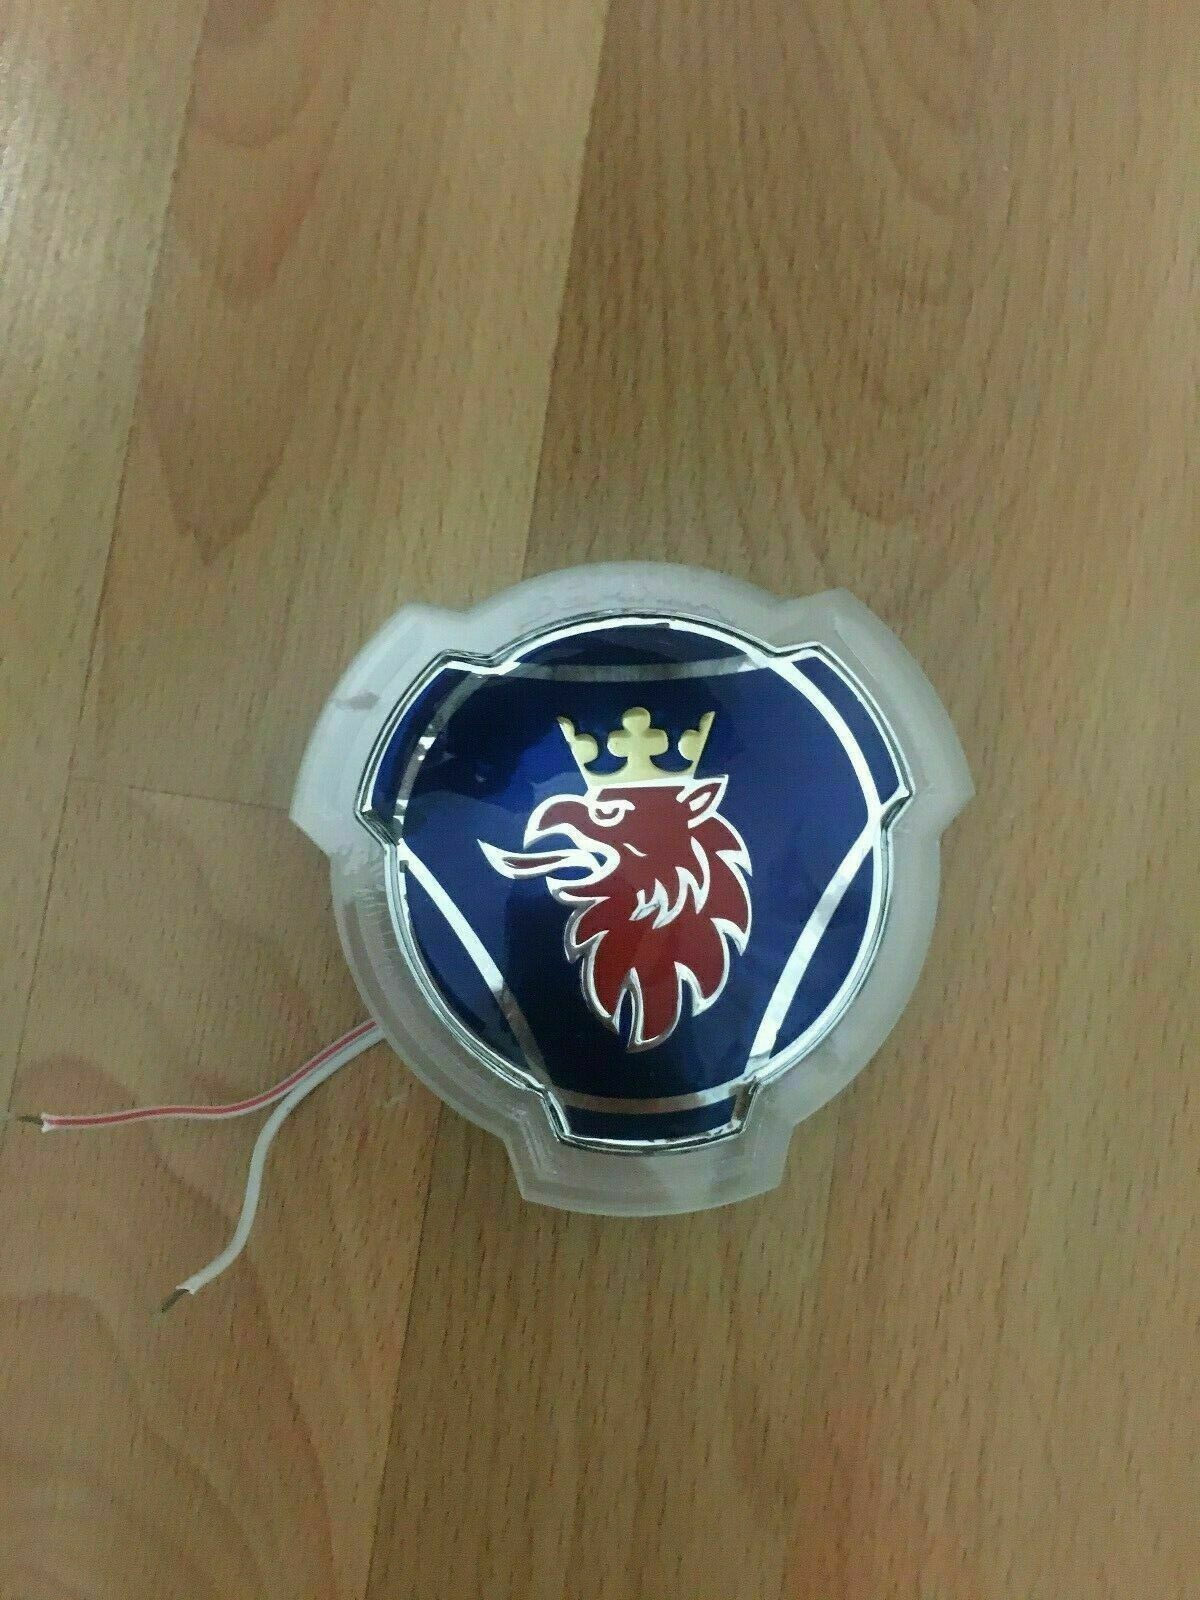 Scania Griffİn Front Grill Emblem badge White LED Headlight Lighting Lamp